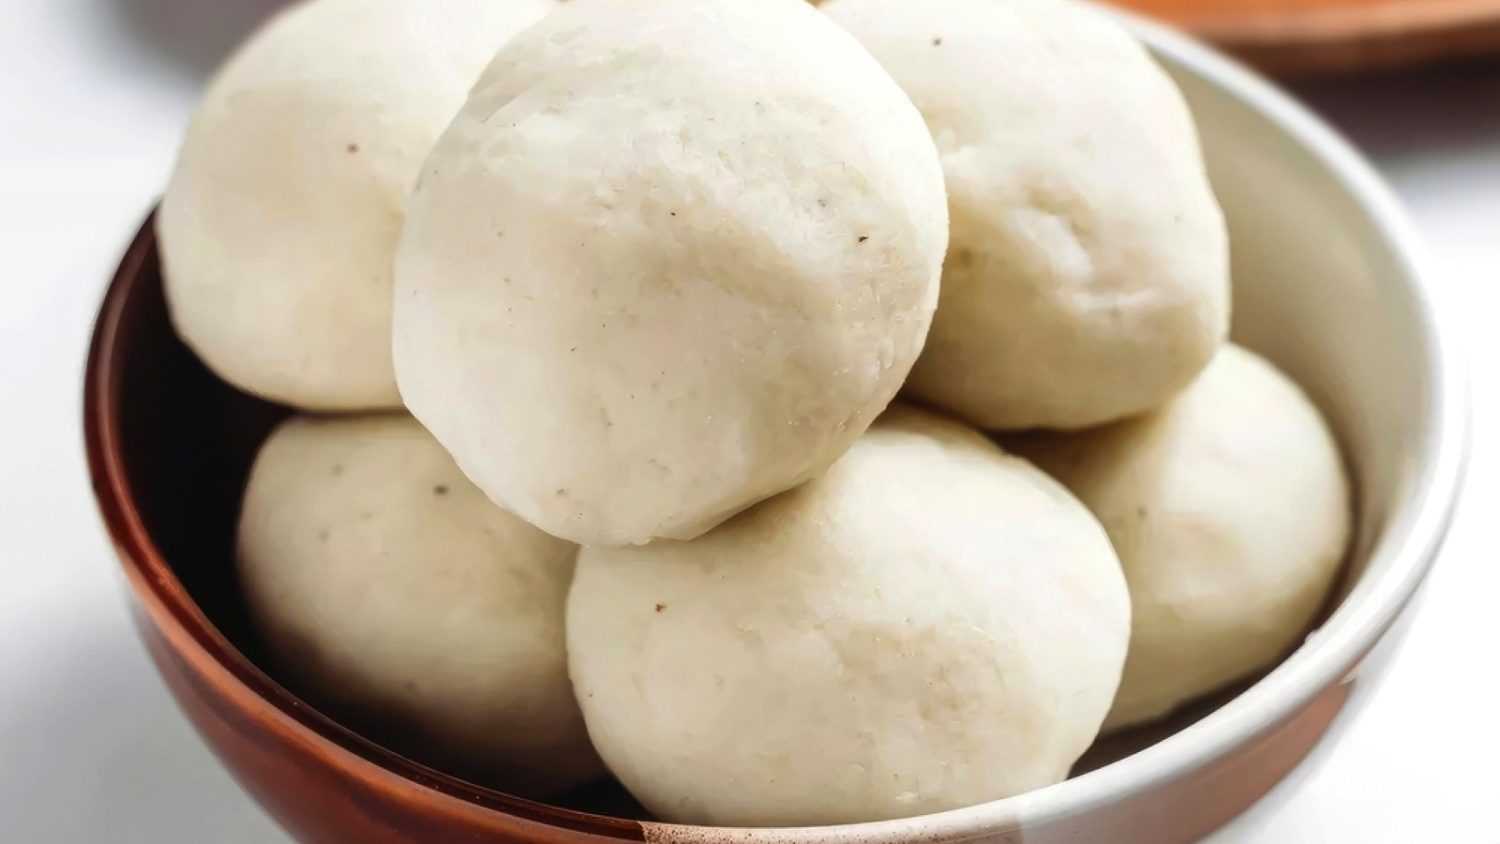 Fufu (fufuo, foofoo, foufou). In Central and Western Africa, fufu is any variety of starchy food that has been mashed and shaped into balls and eaten as a staple. Fufu can be made with yam, cassava